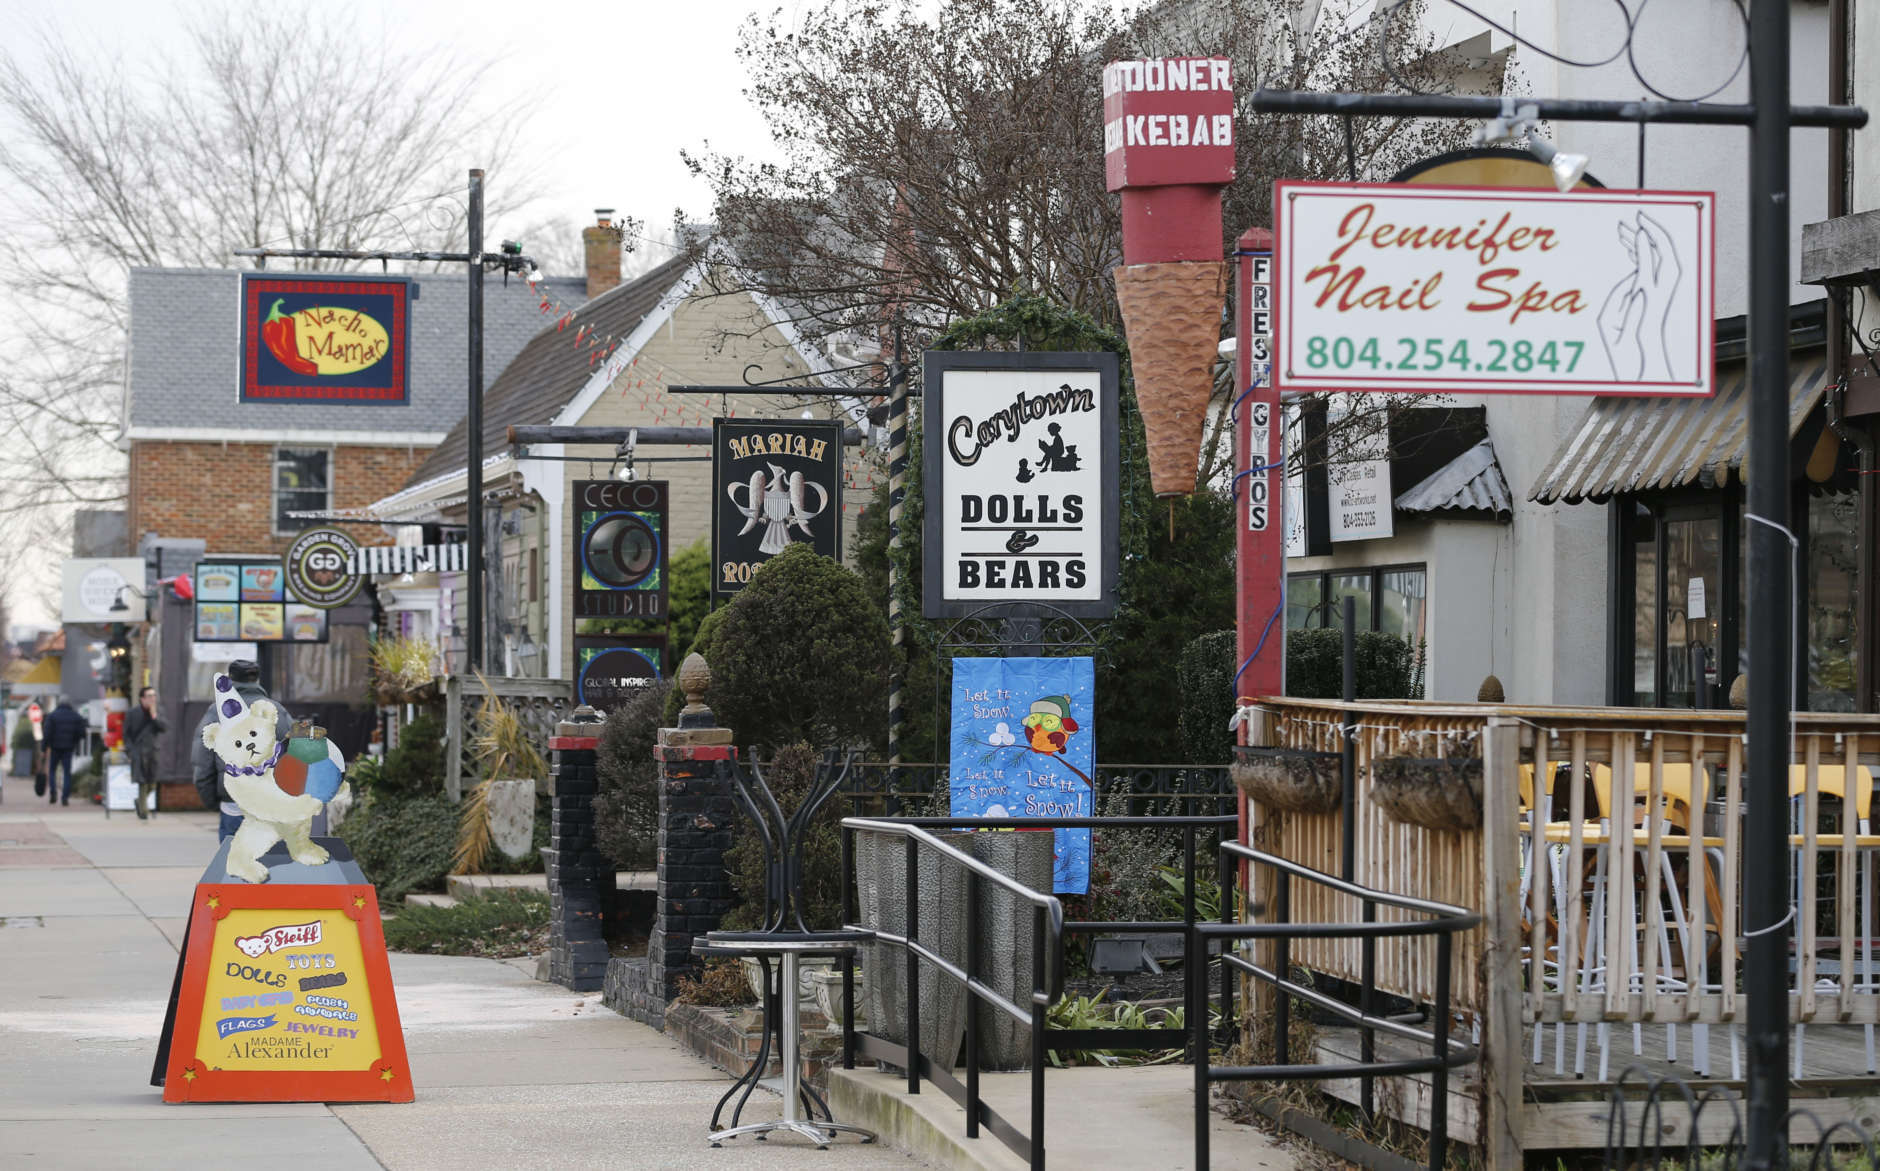 In this Jan. 20, 2016 photo, various shops line the street in Carytown a quaint neighborhood a few miles west of downtown Richmond, Va. Restaurants offer a range of ethnic cuisine and clothing stores range from formalwear to second-hand shops.  (AP Photo/Steve Helber)